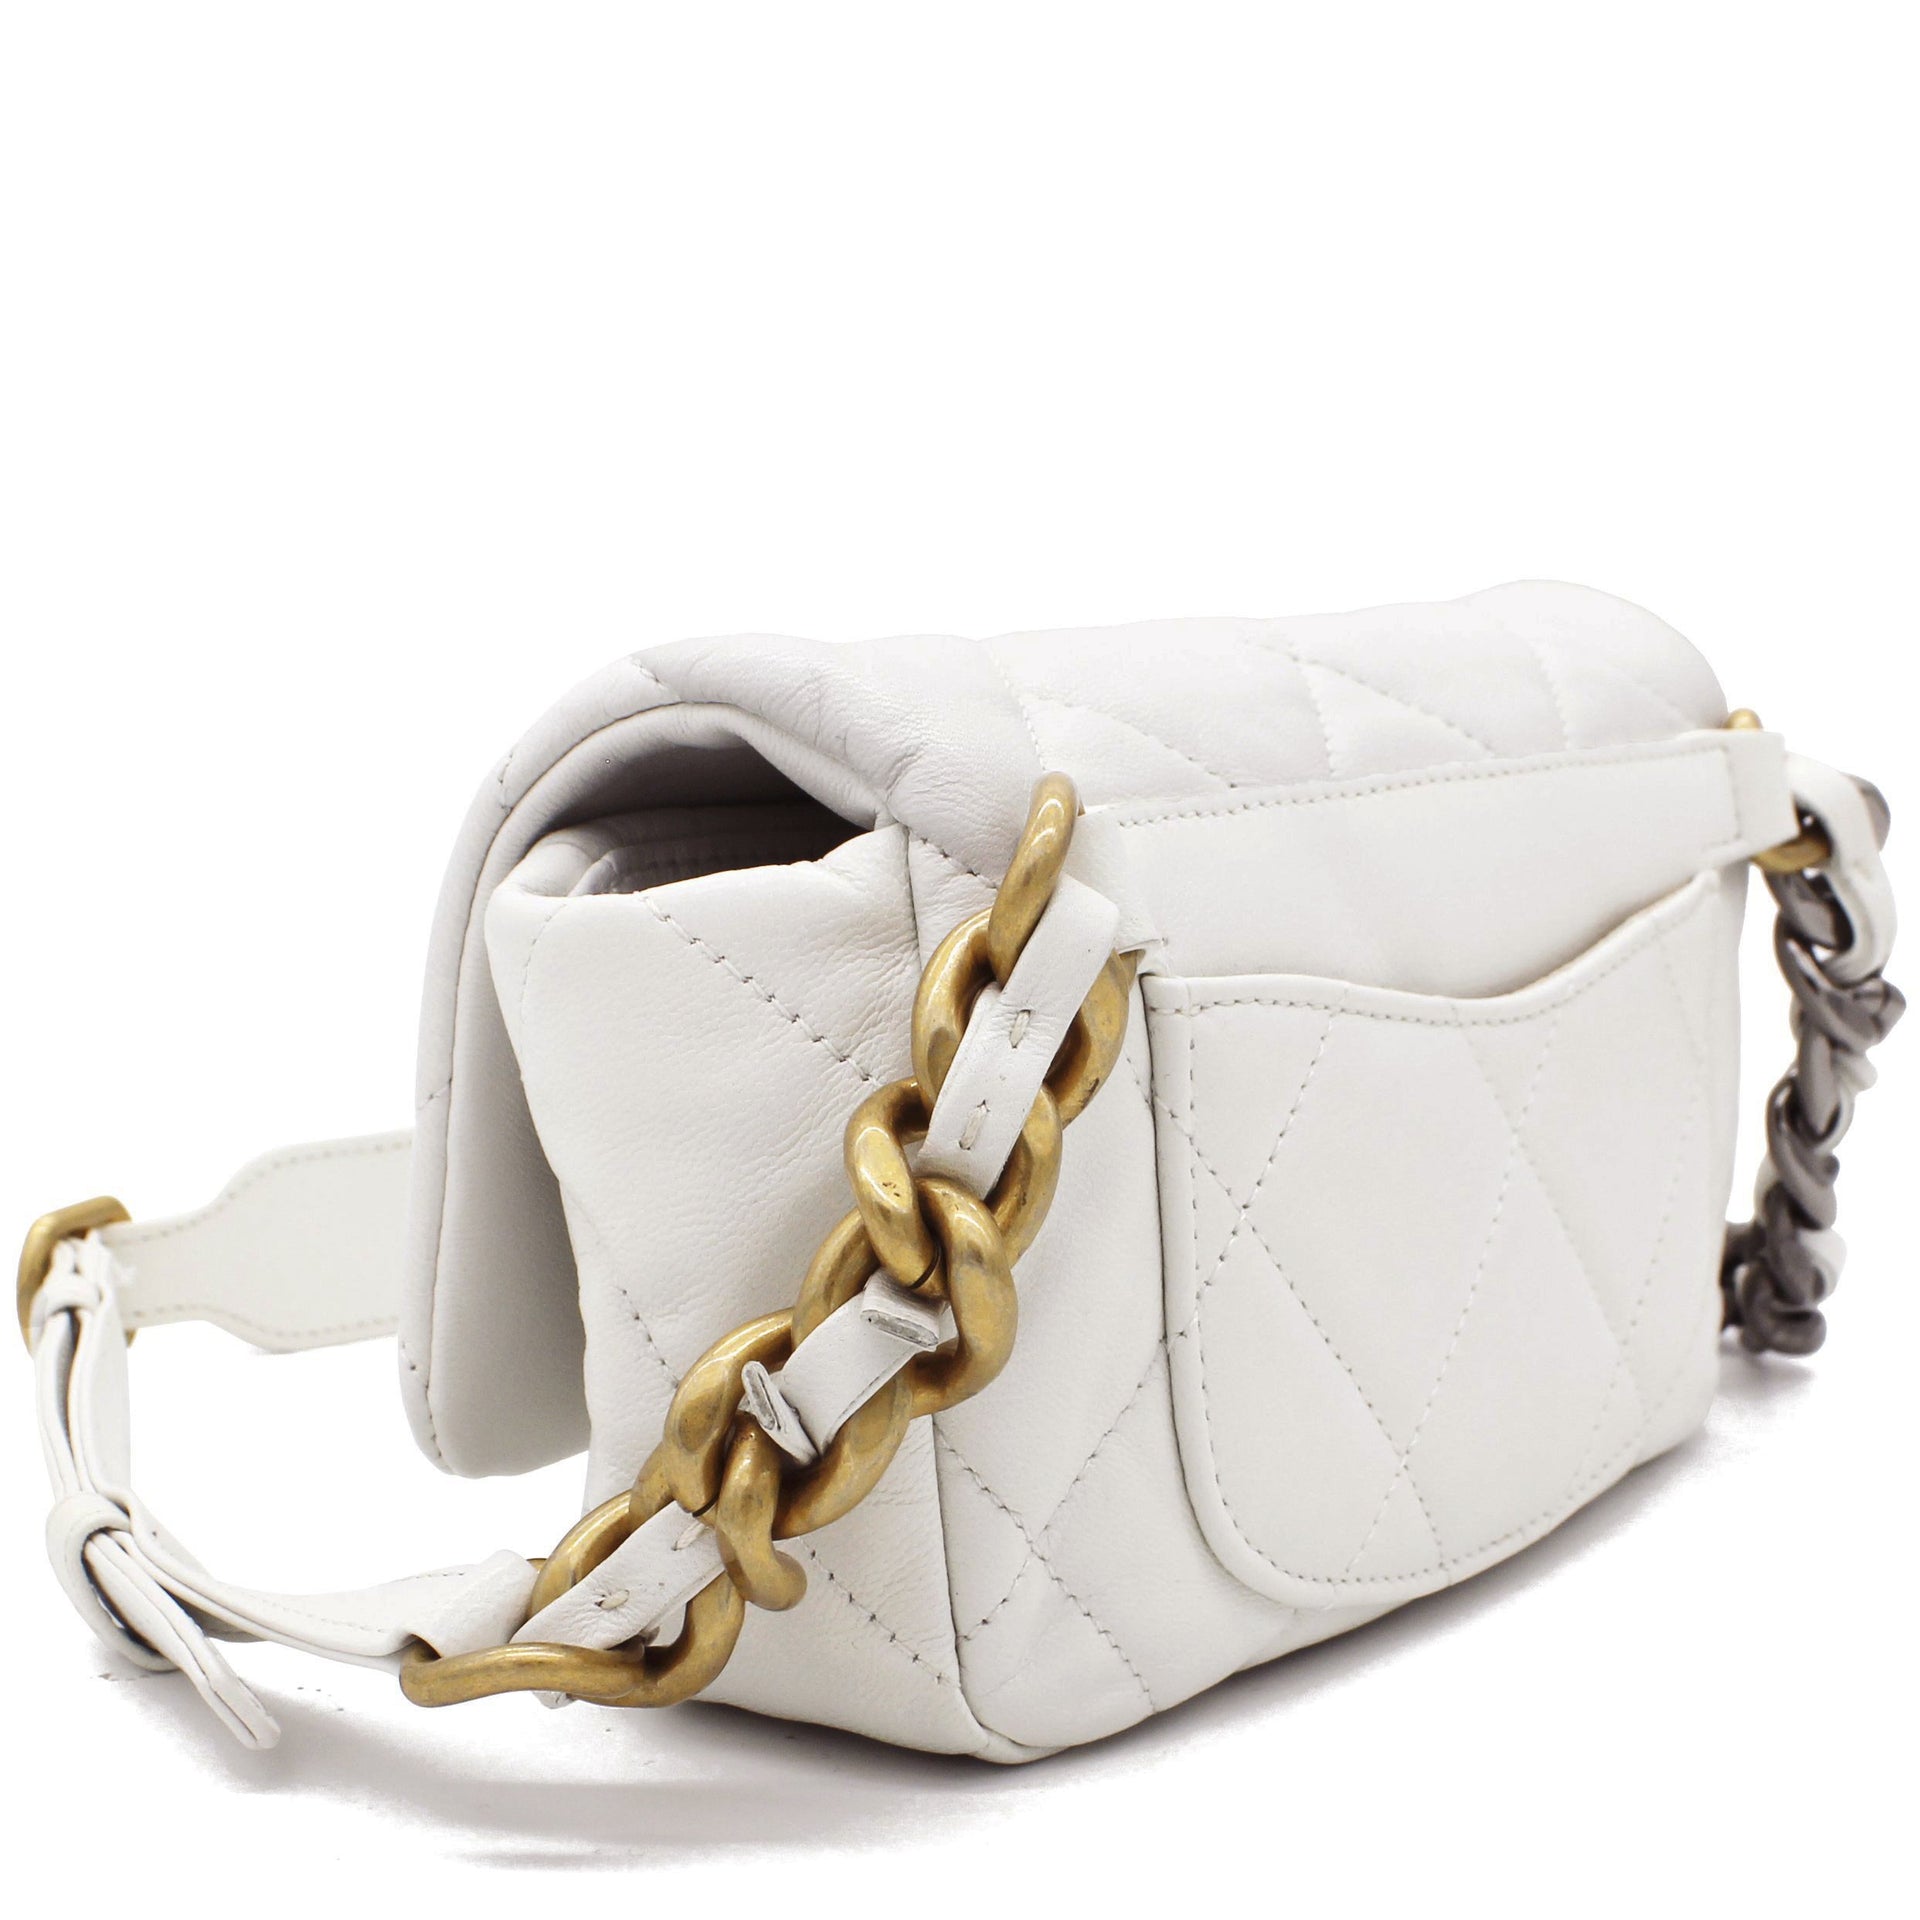 Lambskin Quilted 19 Waist Bag White